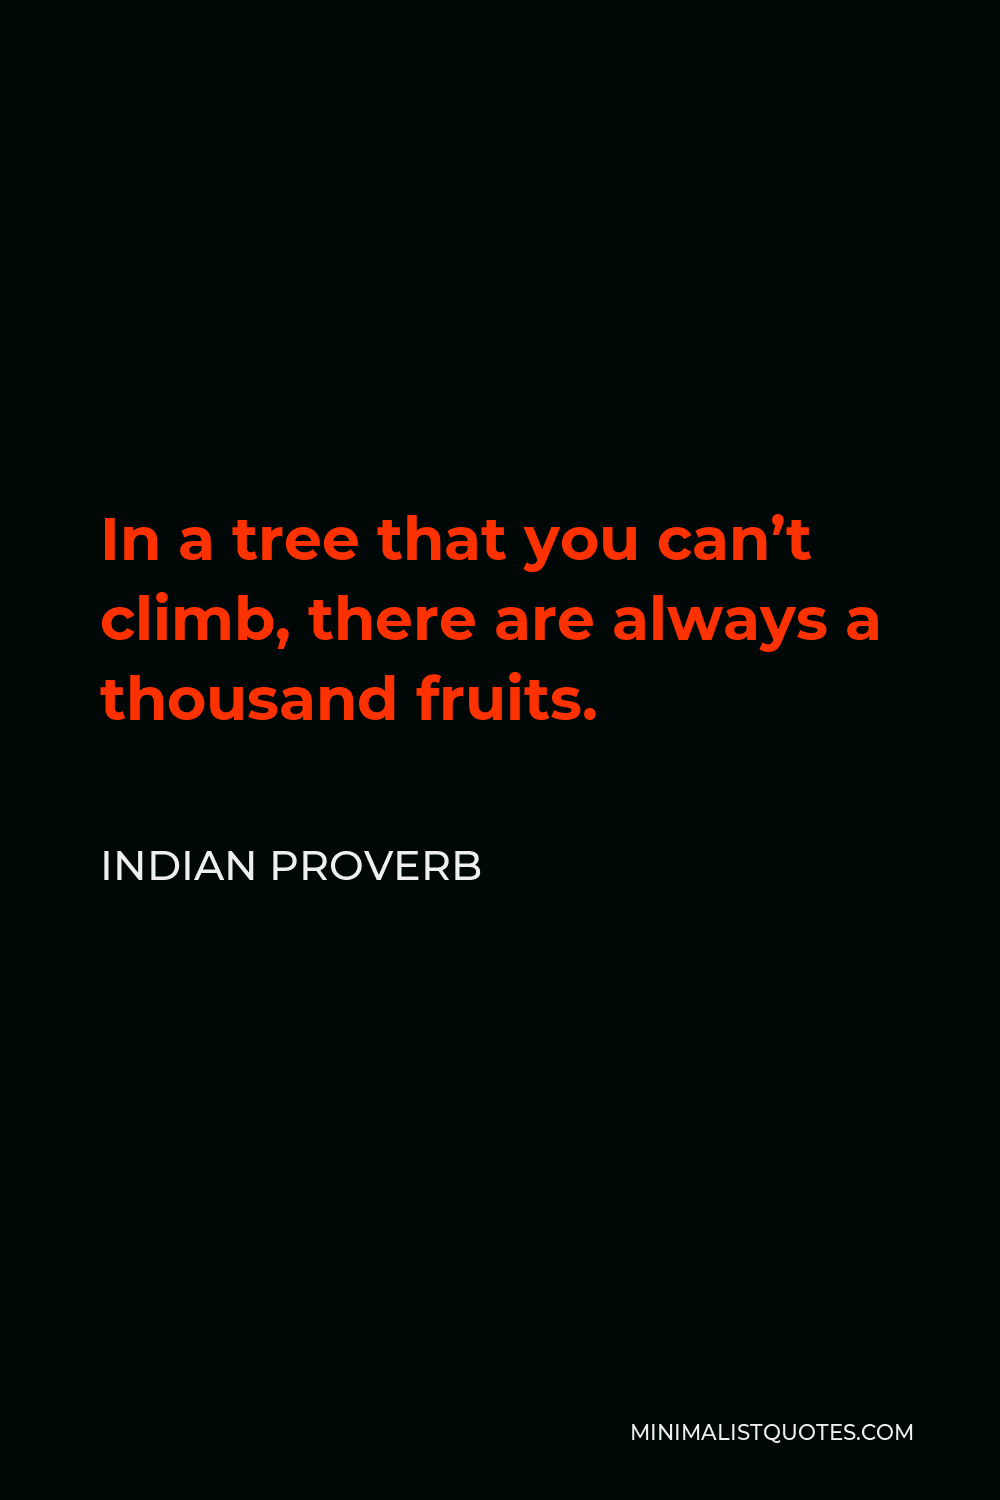 Indian Proverb Quote - In a tree that you can’t climb, there are always a thousand fruits.